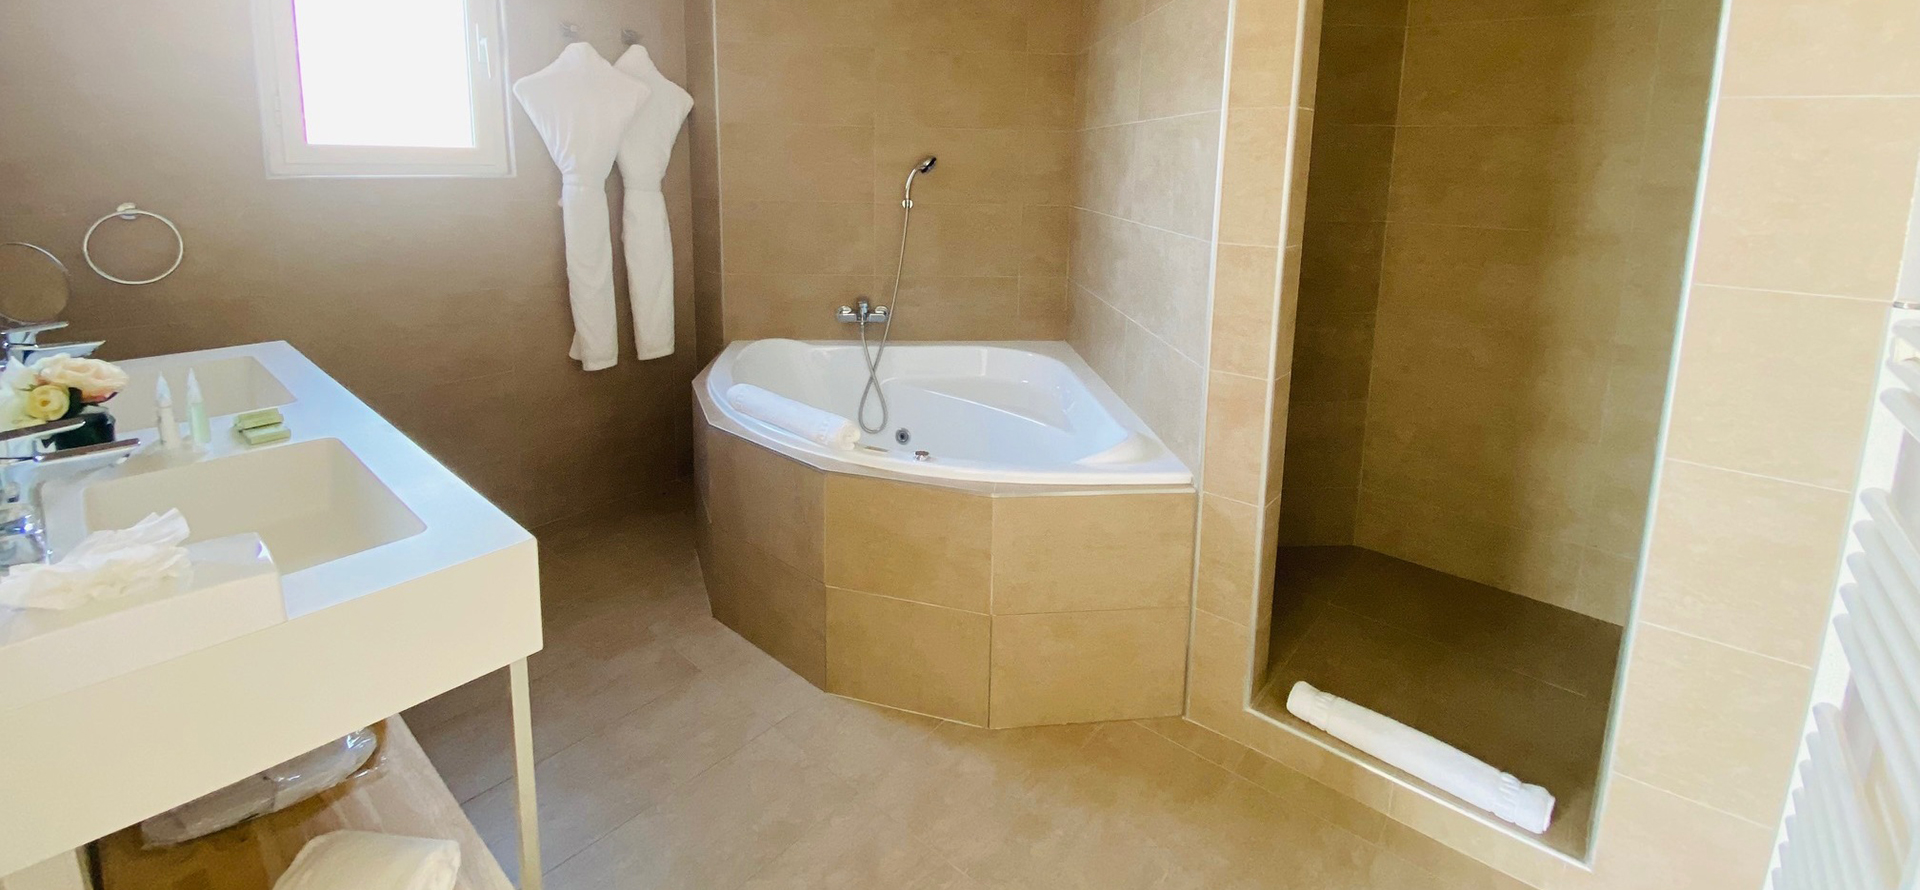 Bathroom with shower and jacuzzi at the Palmyra Golf, a hotel with a spa in Occitanie